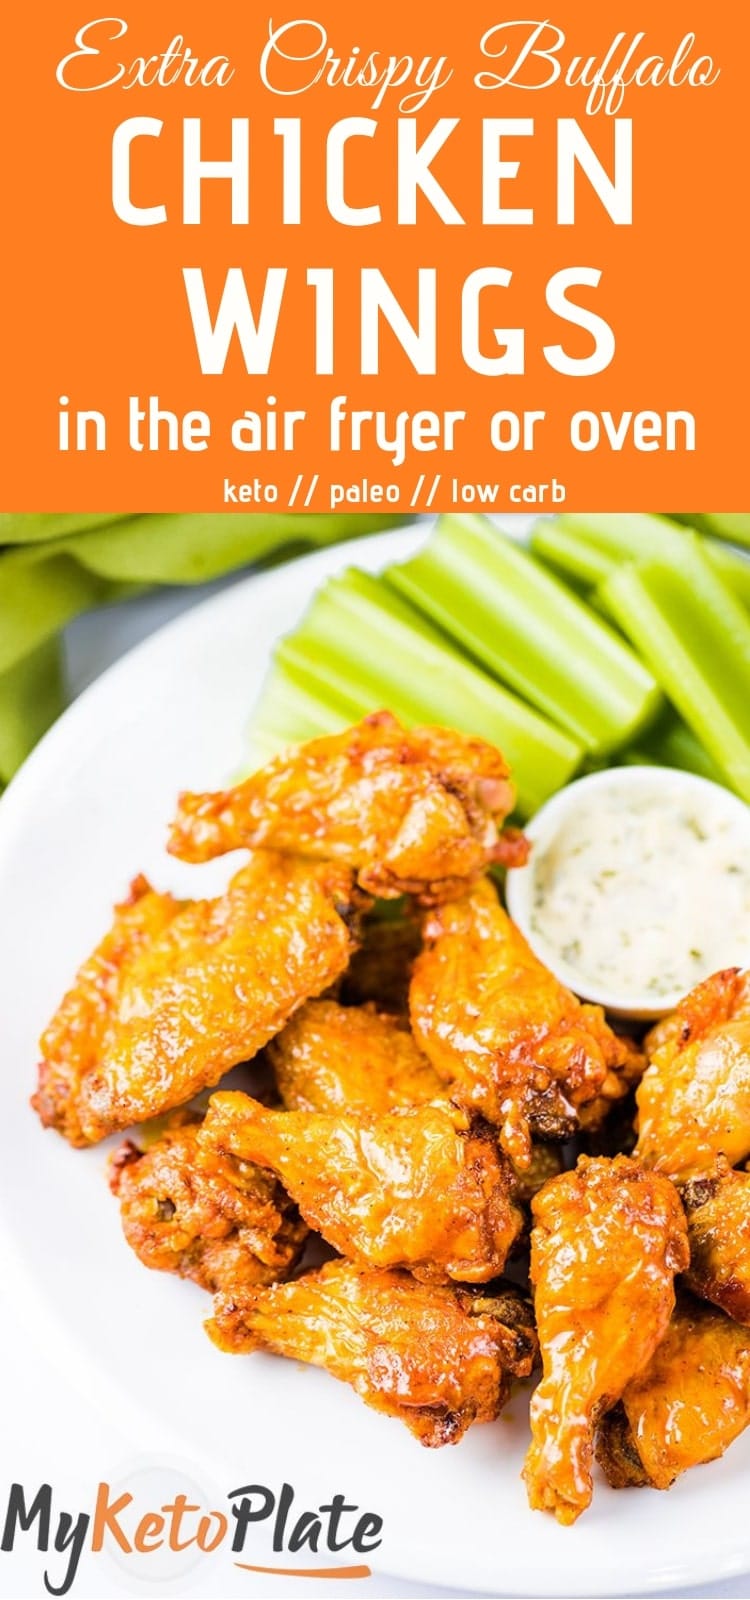 These Extremely Crispy Buffalo Chicken Wings are air fried in the Air Fryer, but you can bake them in the oven. It’s possible to make crispy & juicy chicken wings without deep frying them in tons of oil.